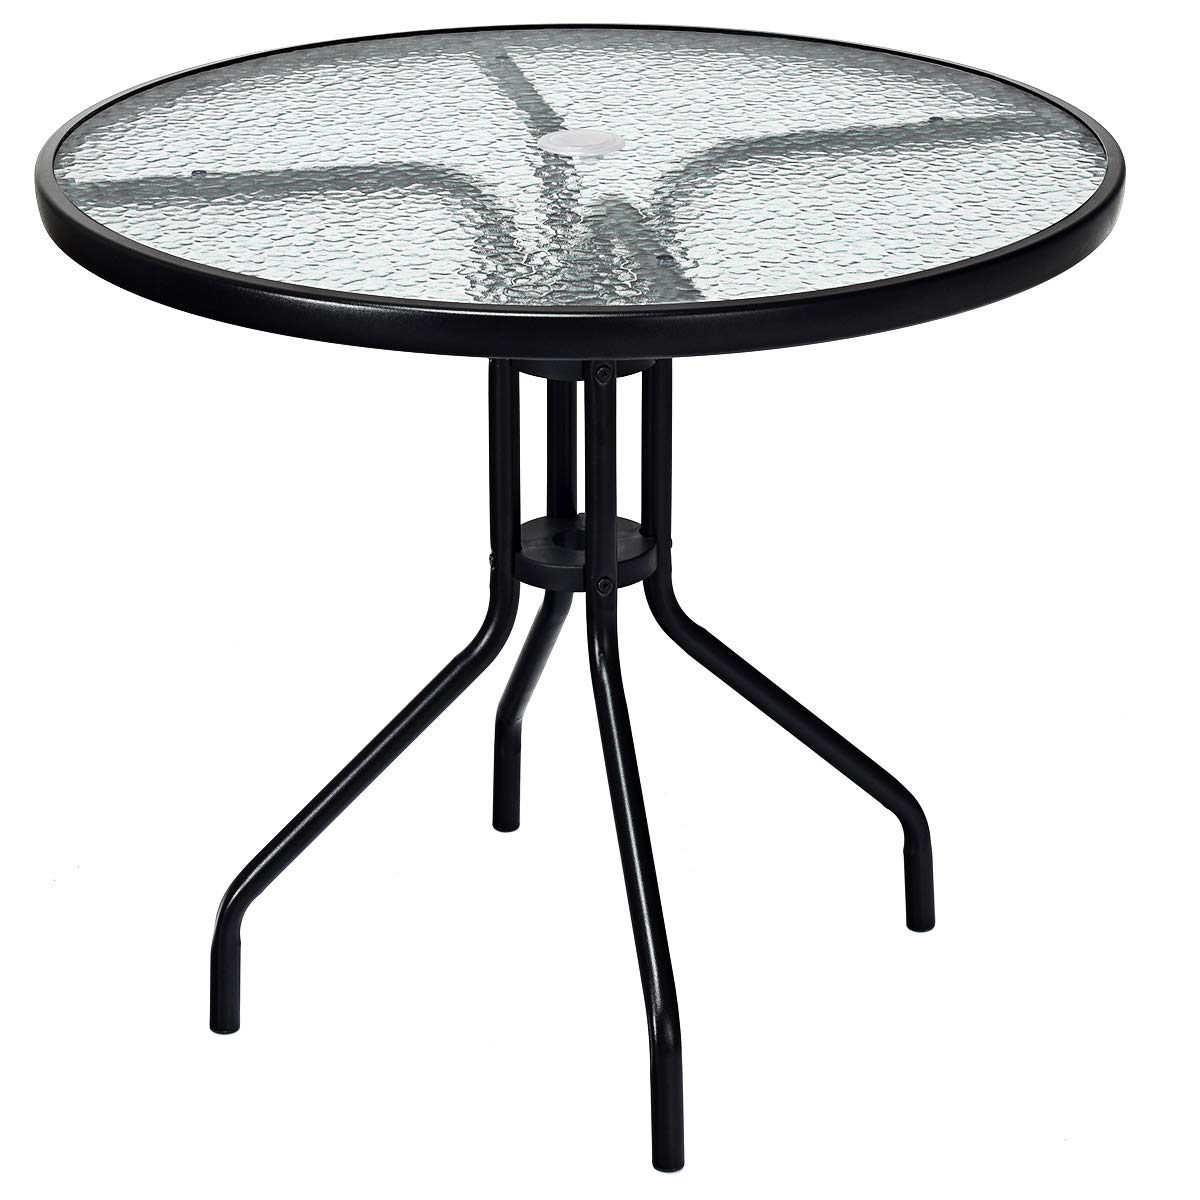 32" Outdoor Patio Table Round Shape Steel Frame Tempered Glass Top - GoplusUS